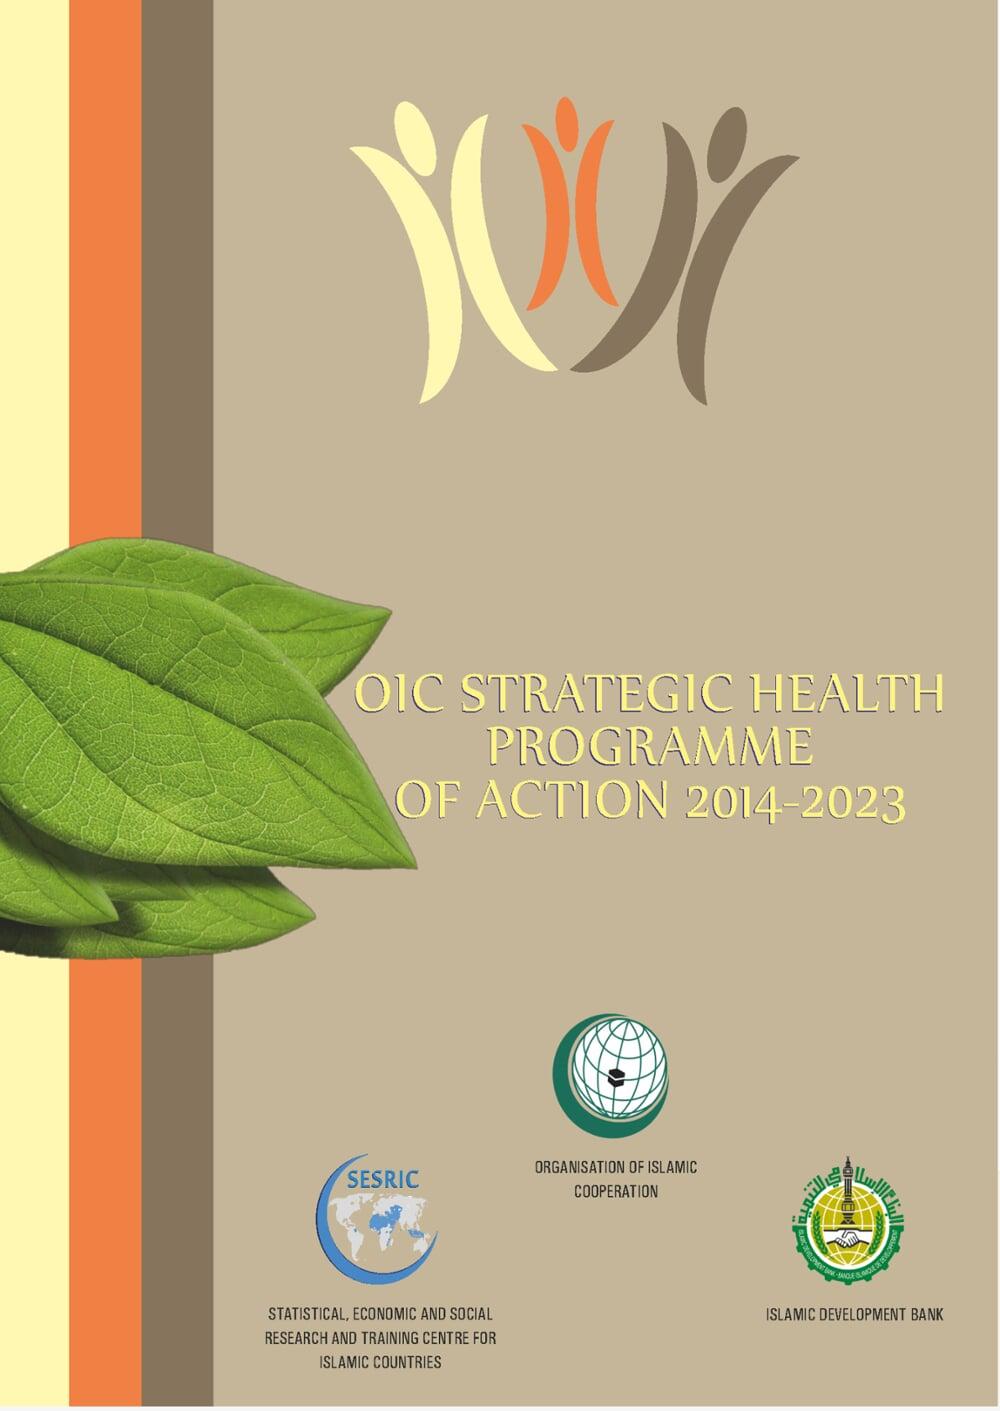 The OIC Strategic Health Programme of Action 2014-2023 (OIC-SHPA) is a framework of cooperation among OIC member countries, relevant OIC institutions and international organizations in the field of health.